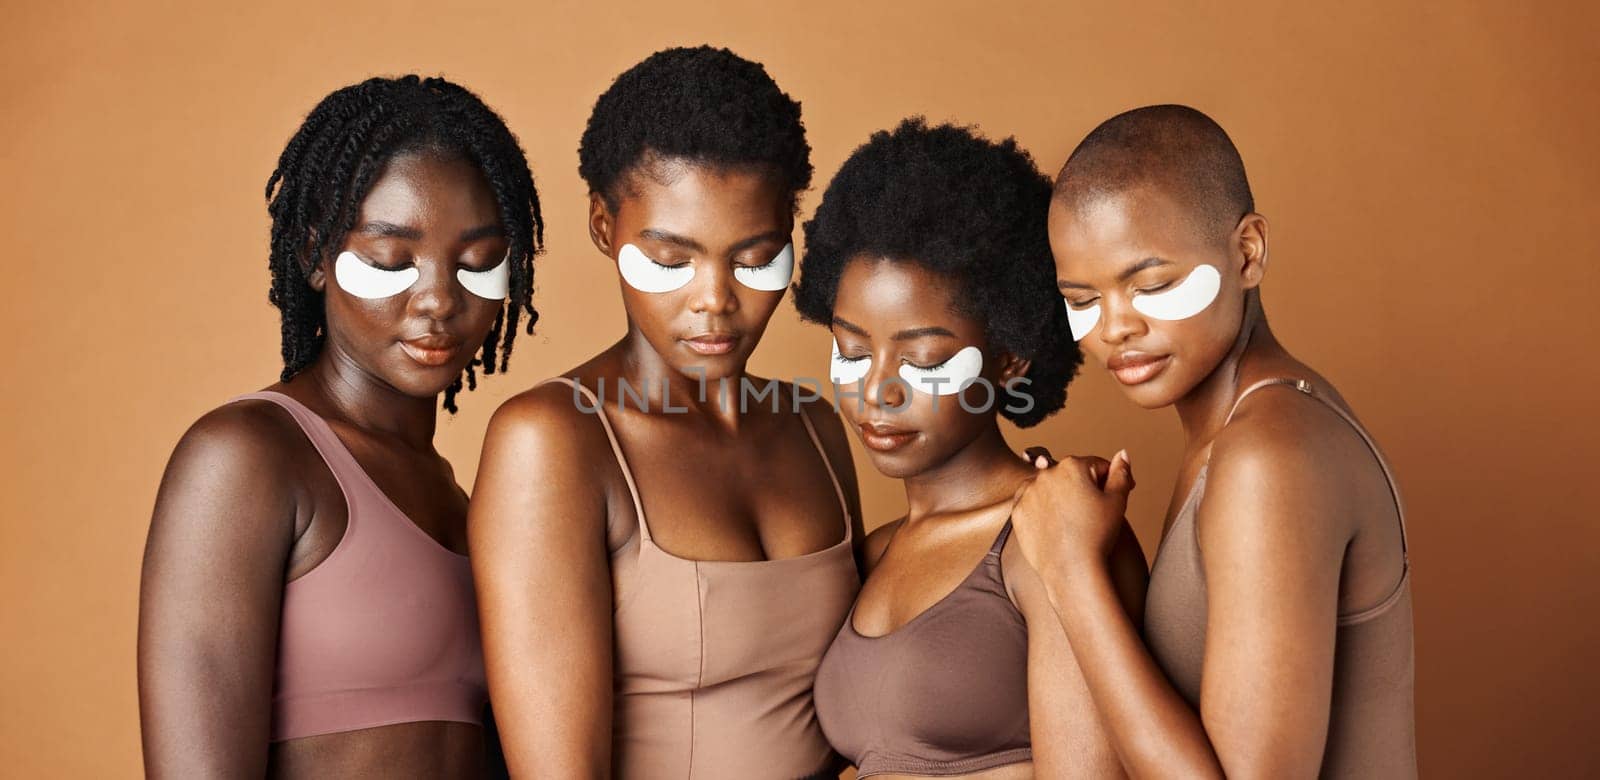 Happy black woman, eye patches and skincare for beauty, epilation or anti aging against a brown studio background. Group portrait of African female people or model in dermatology, health and wellness by YuriArcurs